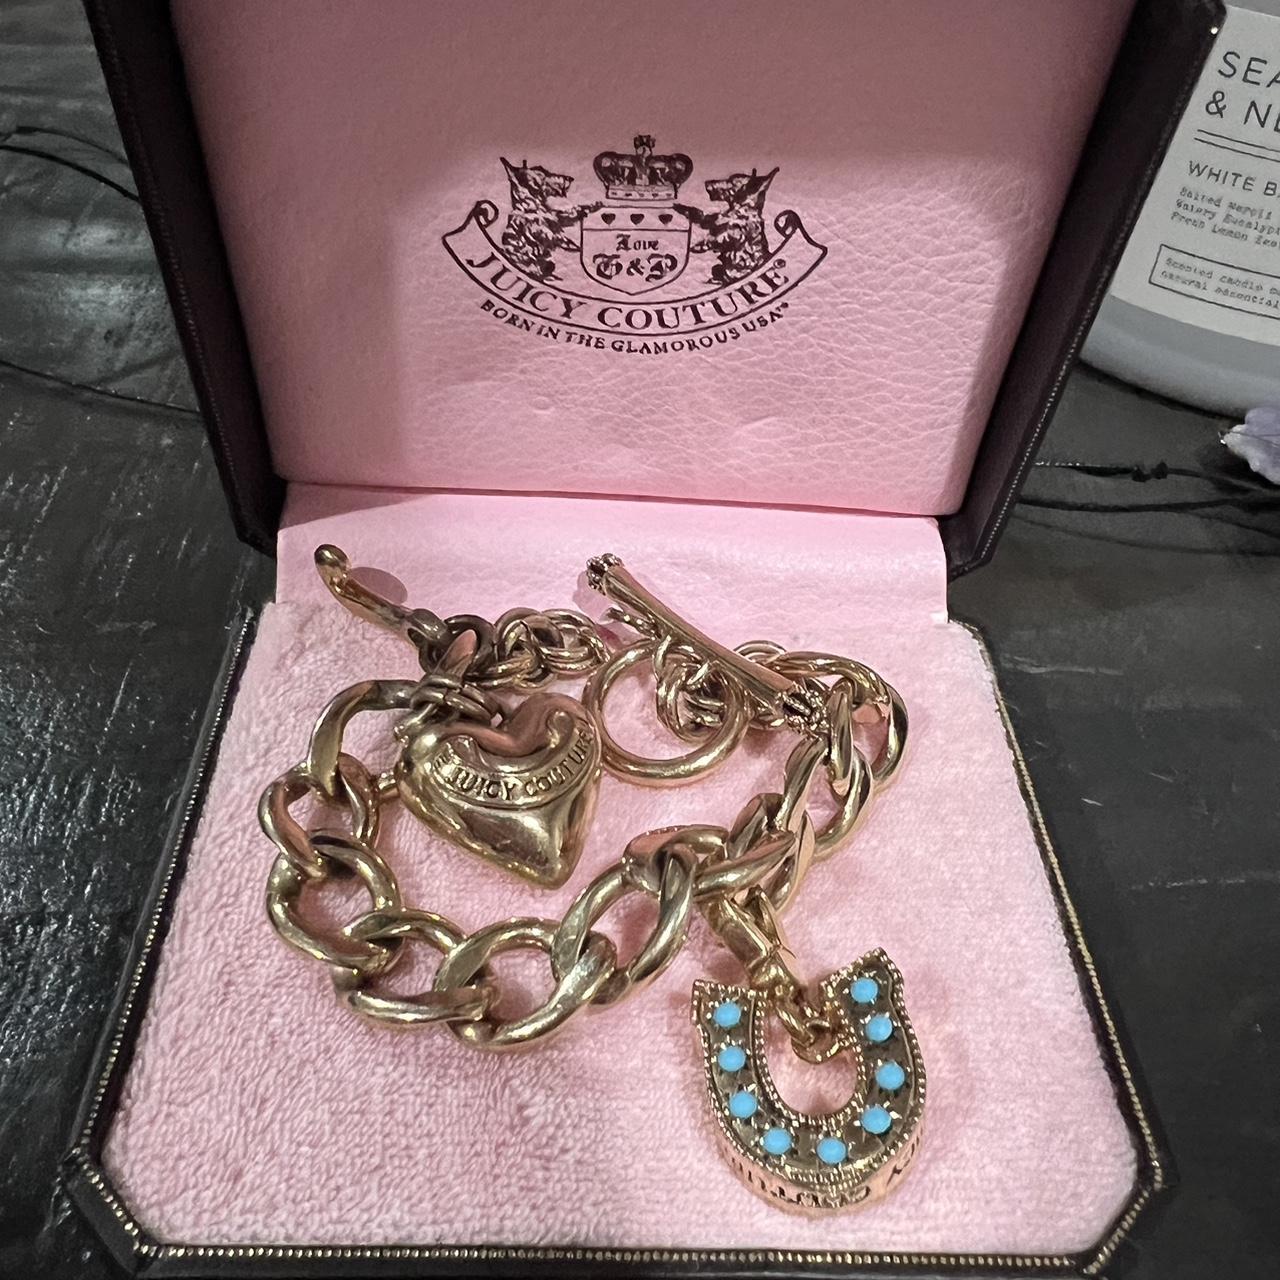 2000s juicy couture gold charm bracelet with - Depop